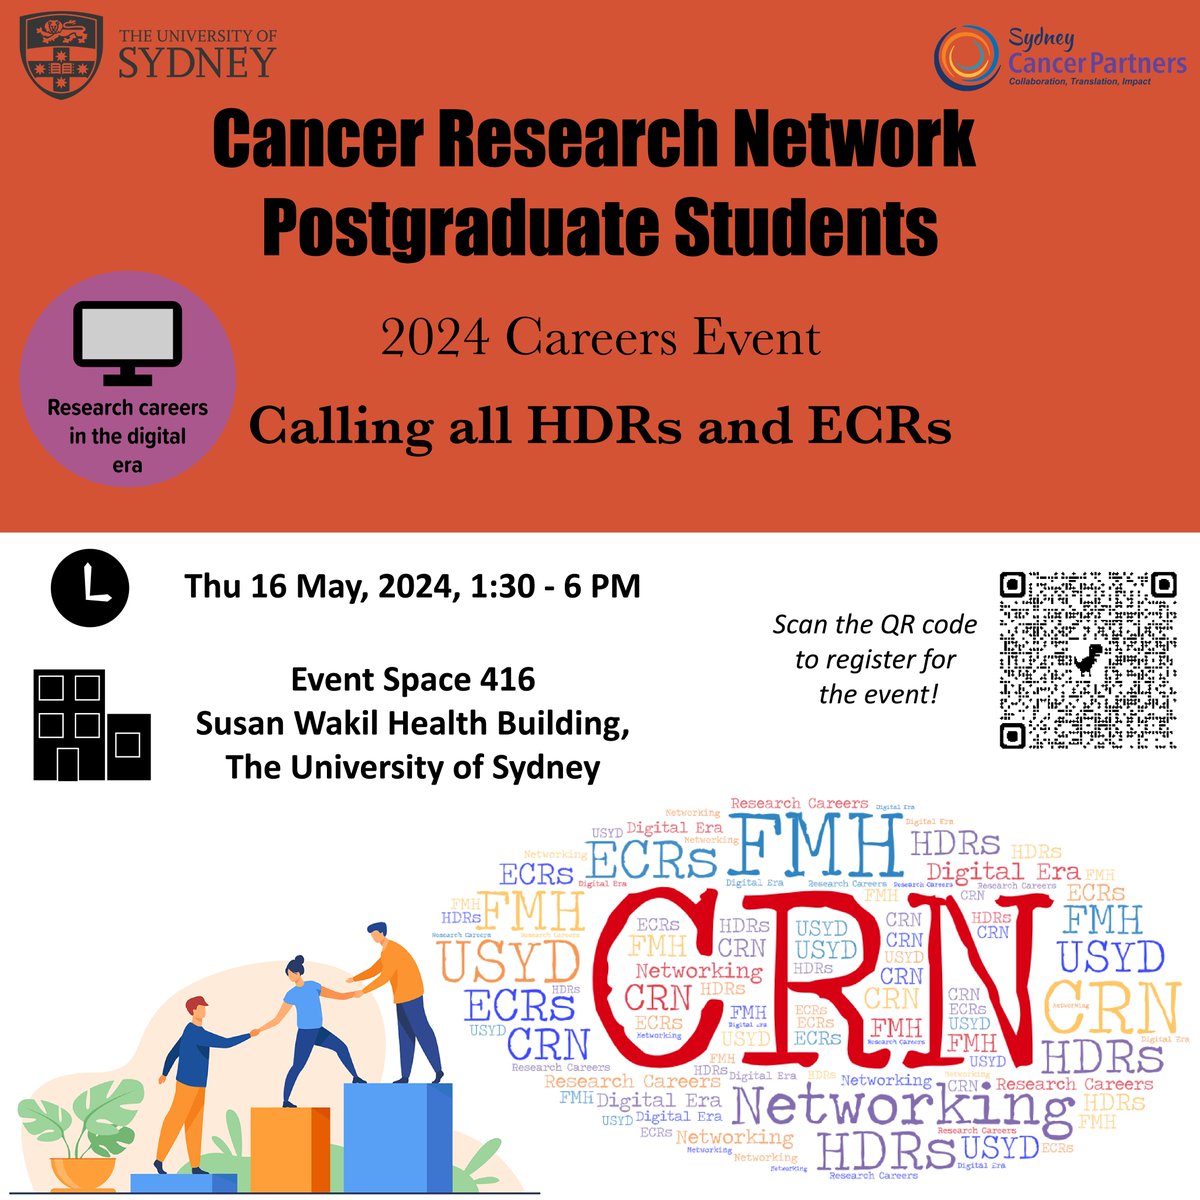 Calling all HDRs and ECRs! Join us at the CRN Postgraduate Student Careers event on Thursday 16 May 2024 from 1:30-6 pm at the Susan Wakil Health Building. Learn about careers in science, meet other CRN members and enjoy some delicious food! eventbrite.com.au/e/2024-crn-pos… #HDRs #ECRs